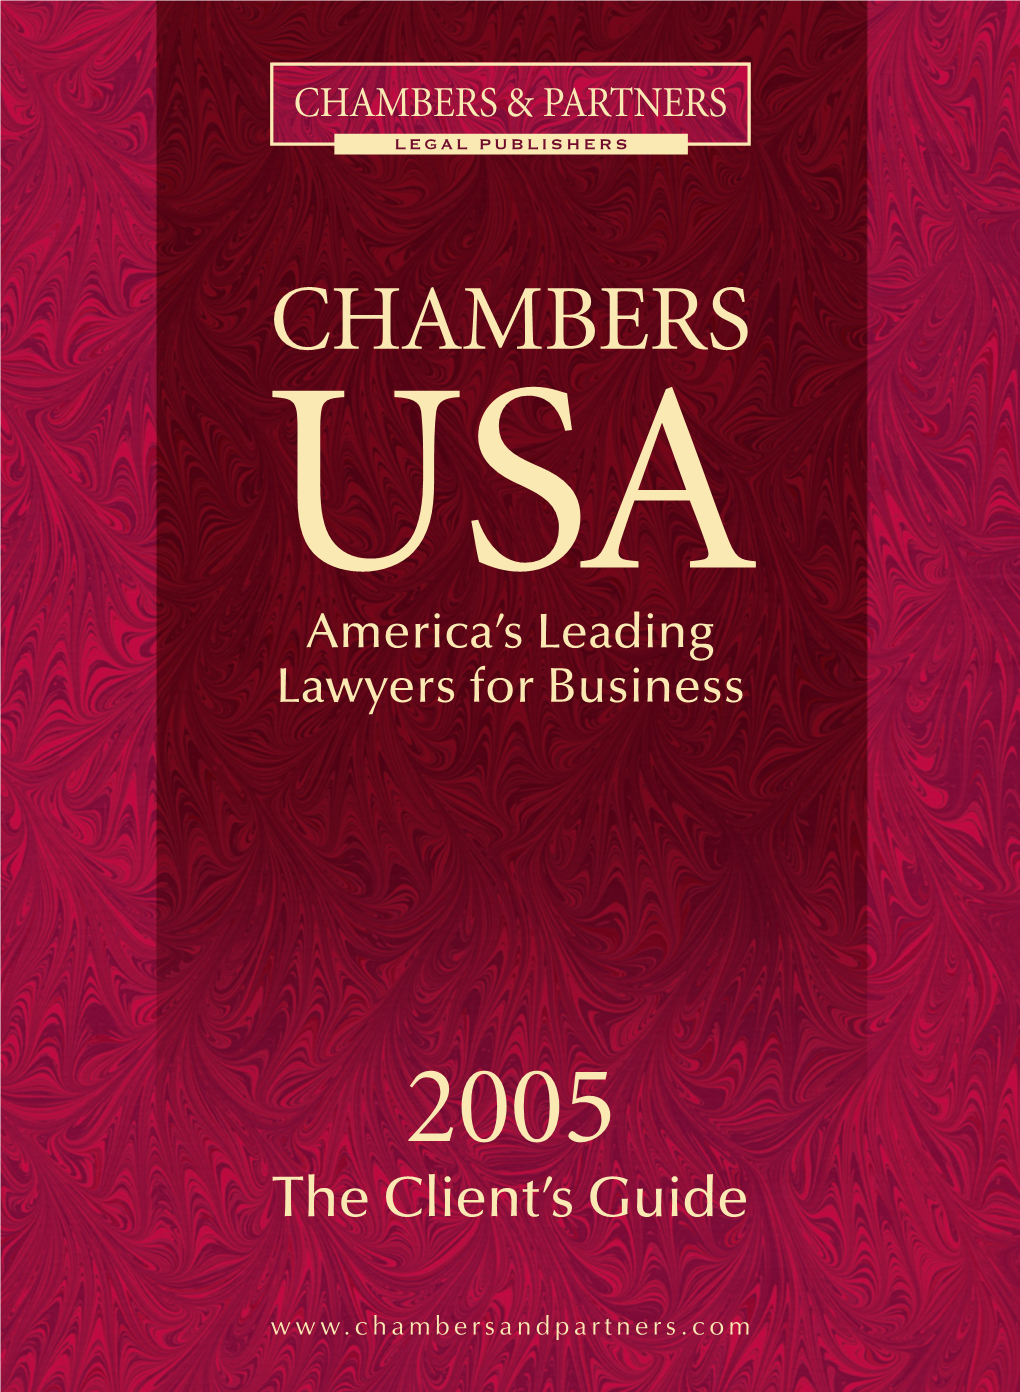 Chambers & Partners Legal Publishers